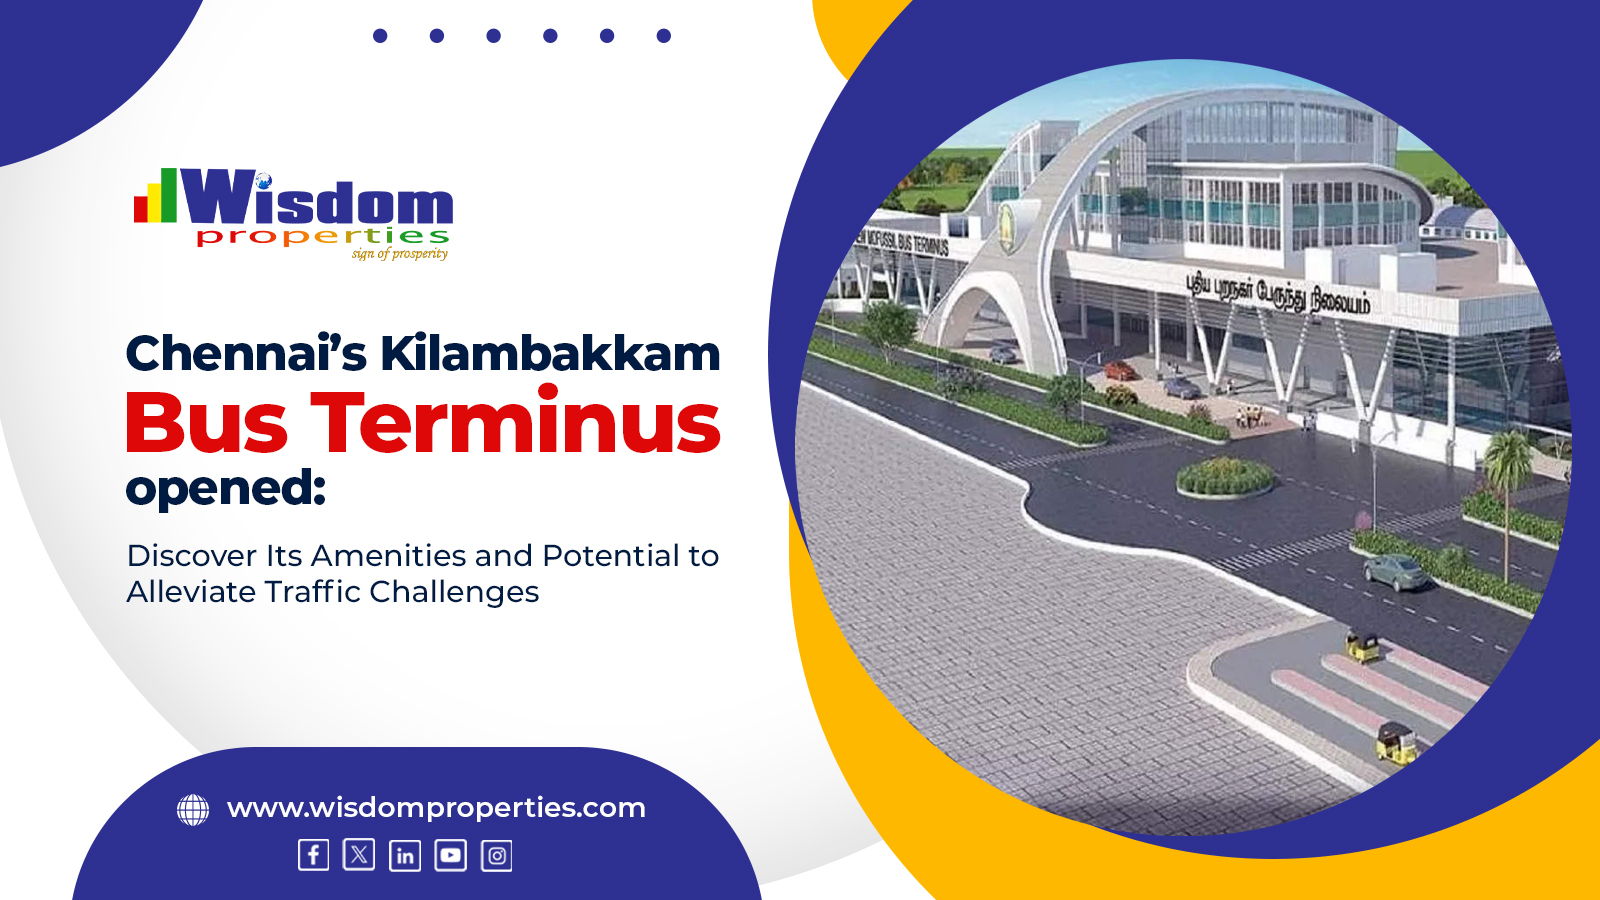 Chennai’s Kilambakkam bus terminus opened: Discover Its Amenities and Potential to Alleviate Traffic Challenges